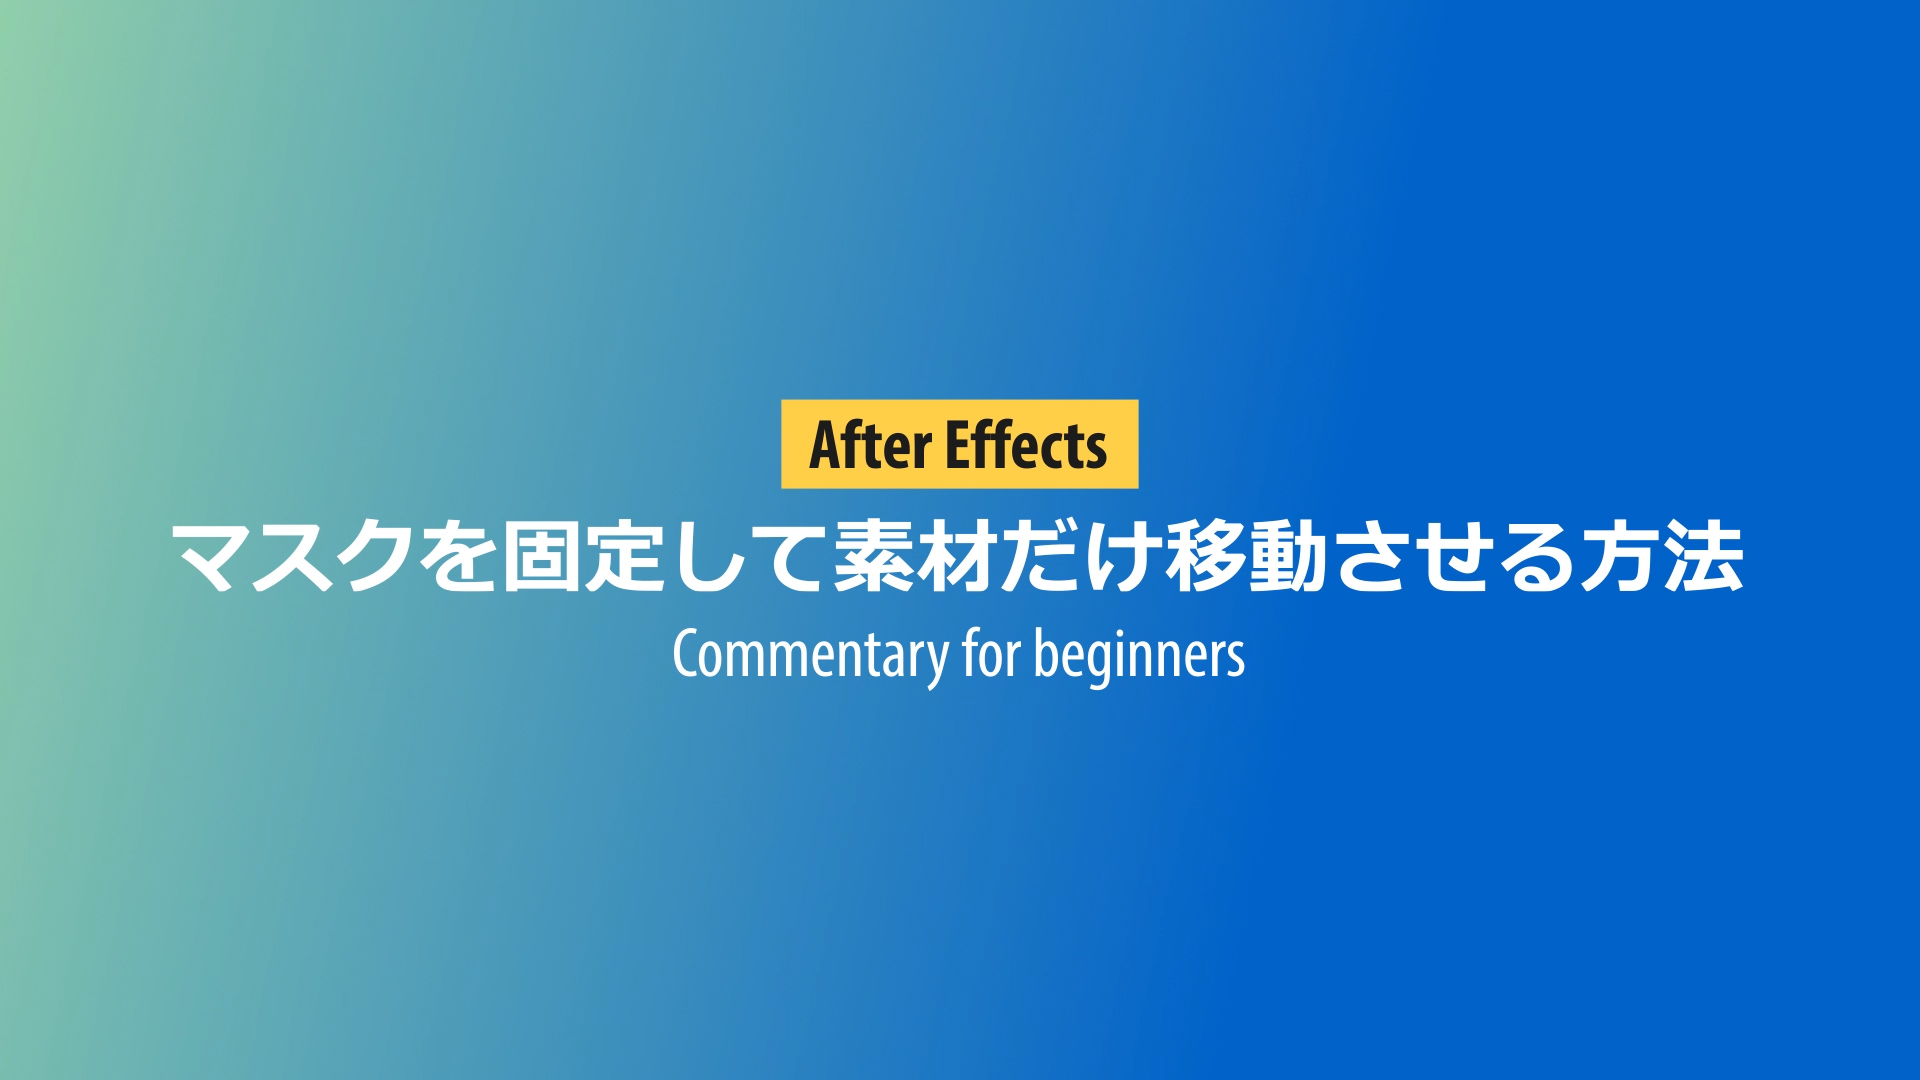 After Effects マスクを固定して素材だけ移動させる方法 動画虎の巻